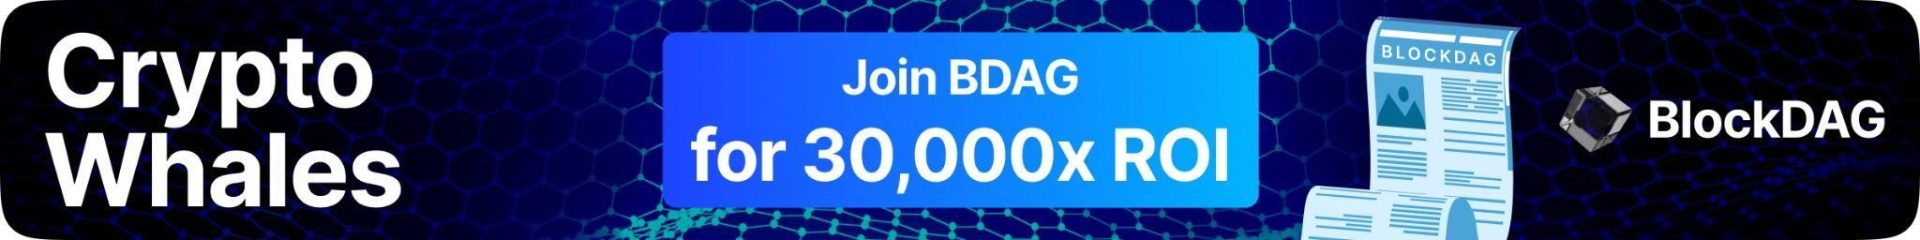 BlockDAG: Leads the $600 Million Cost with Sustainable Blockchain Technology Over BNB Smart Chain and Fantom